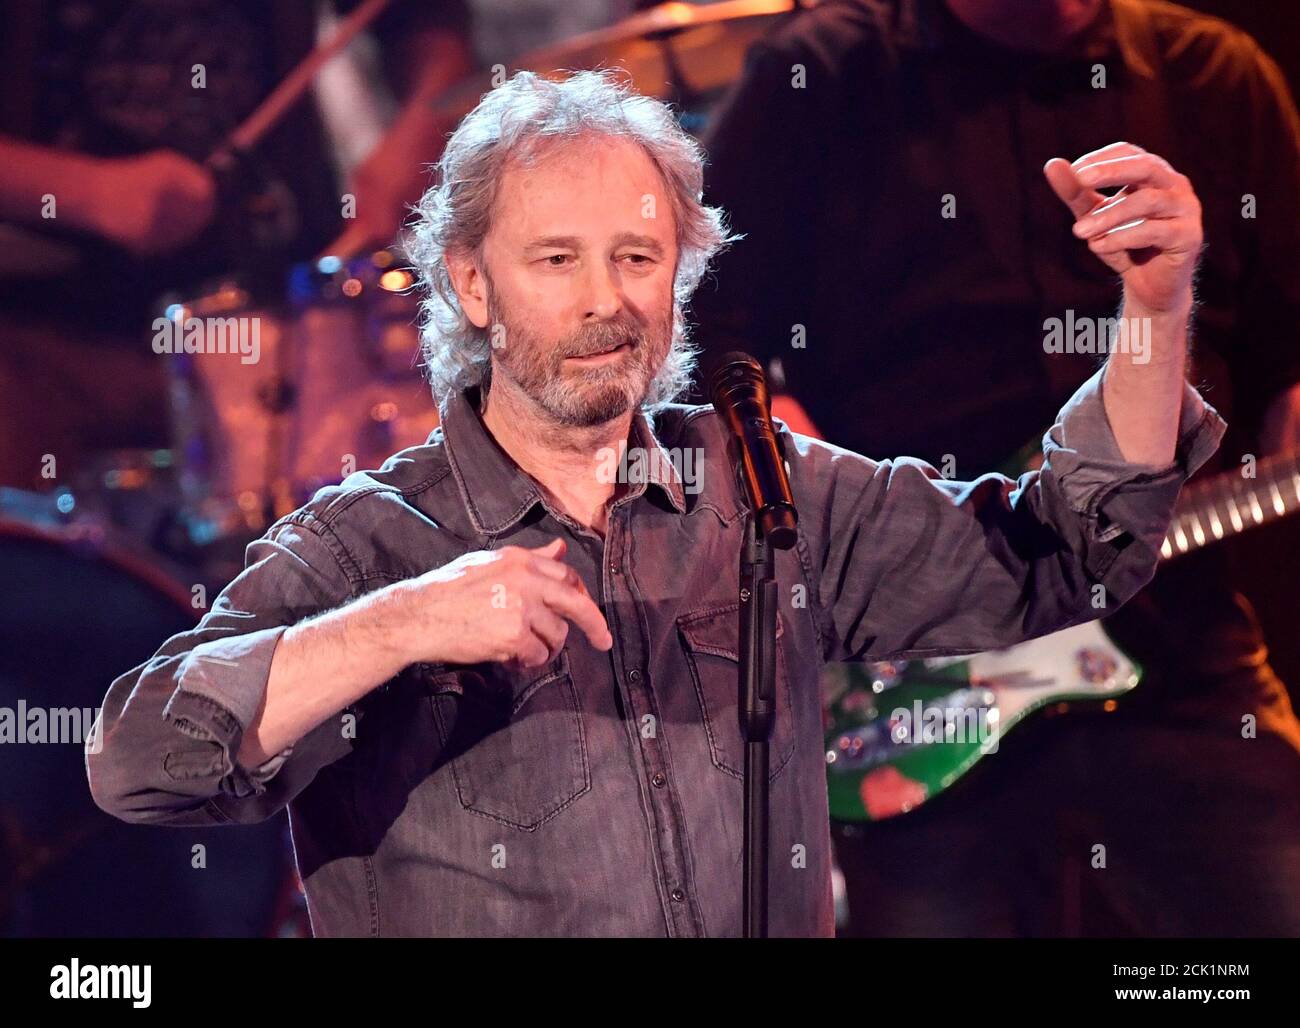 Singer Pete Wolf Former Wolfgang Petry Performs During The Charity Gala Ein Herz Fuer Kinder A Heart For Children In Berlin Germany Saturday December 7 2019 Picture Taken December 7 2019 Jens